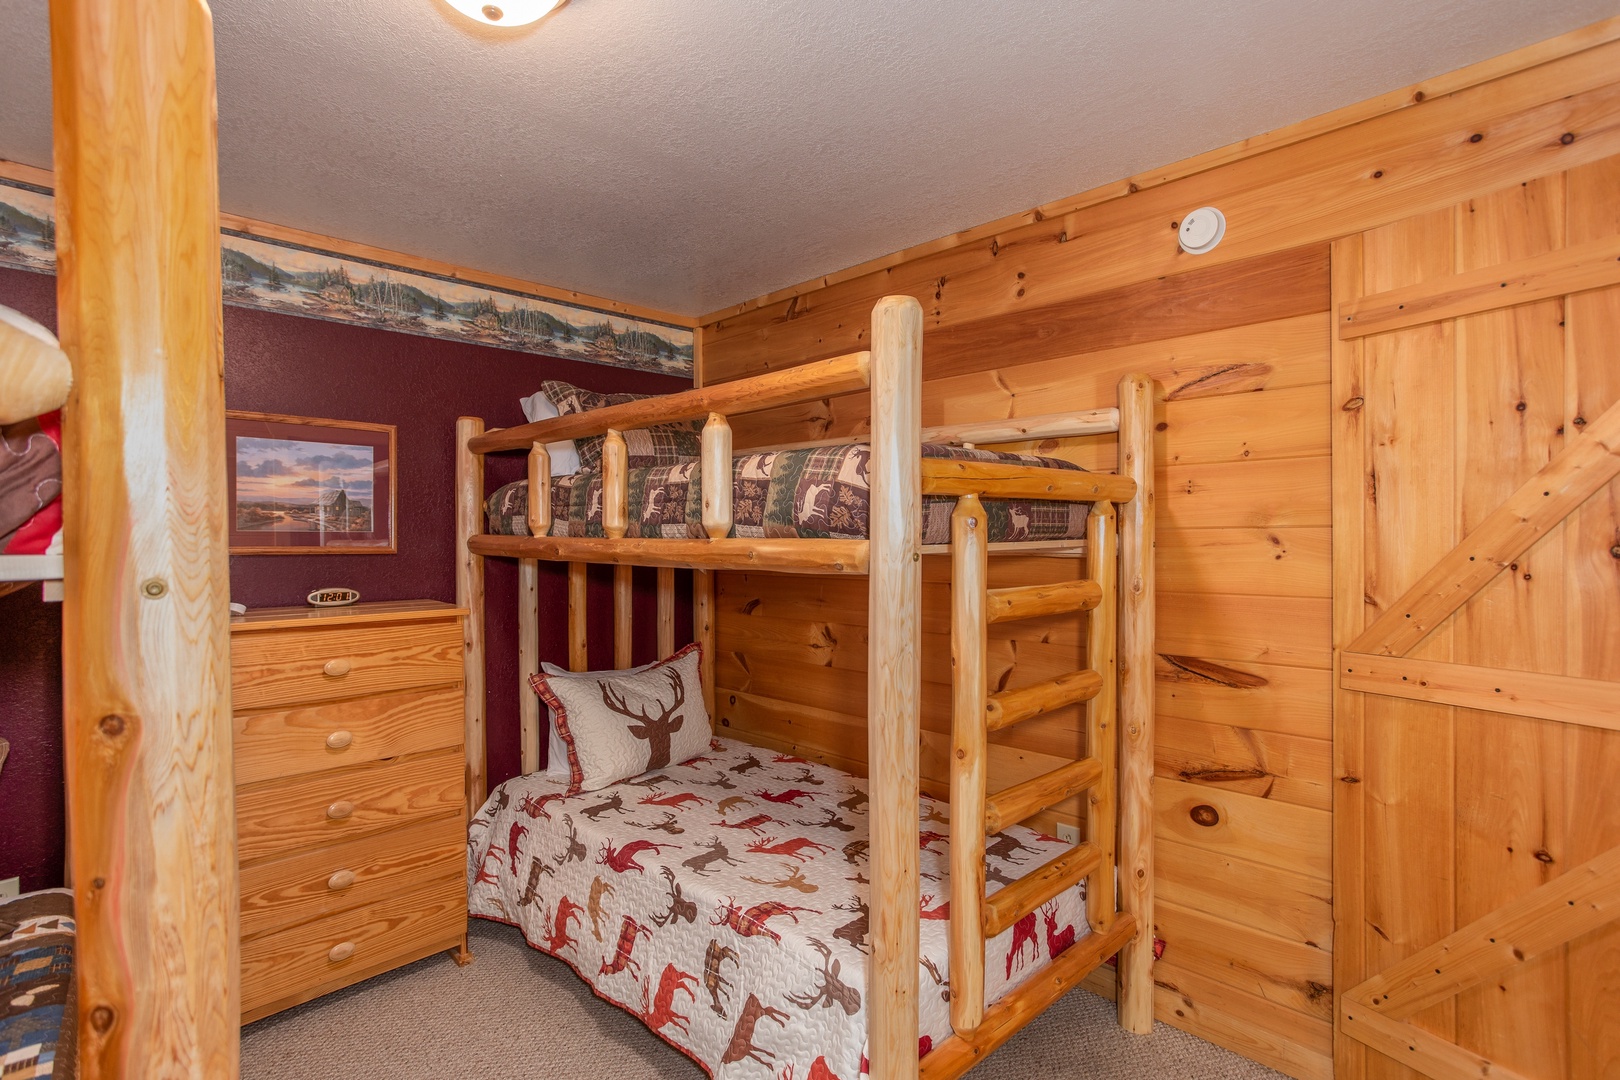 Room with two sets of twin bunk beds at Bearly in the Mountains, a 5-bedroom cabin rental located in Pigeon Forge